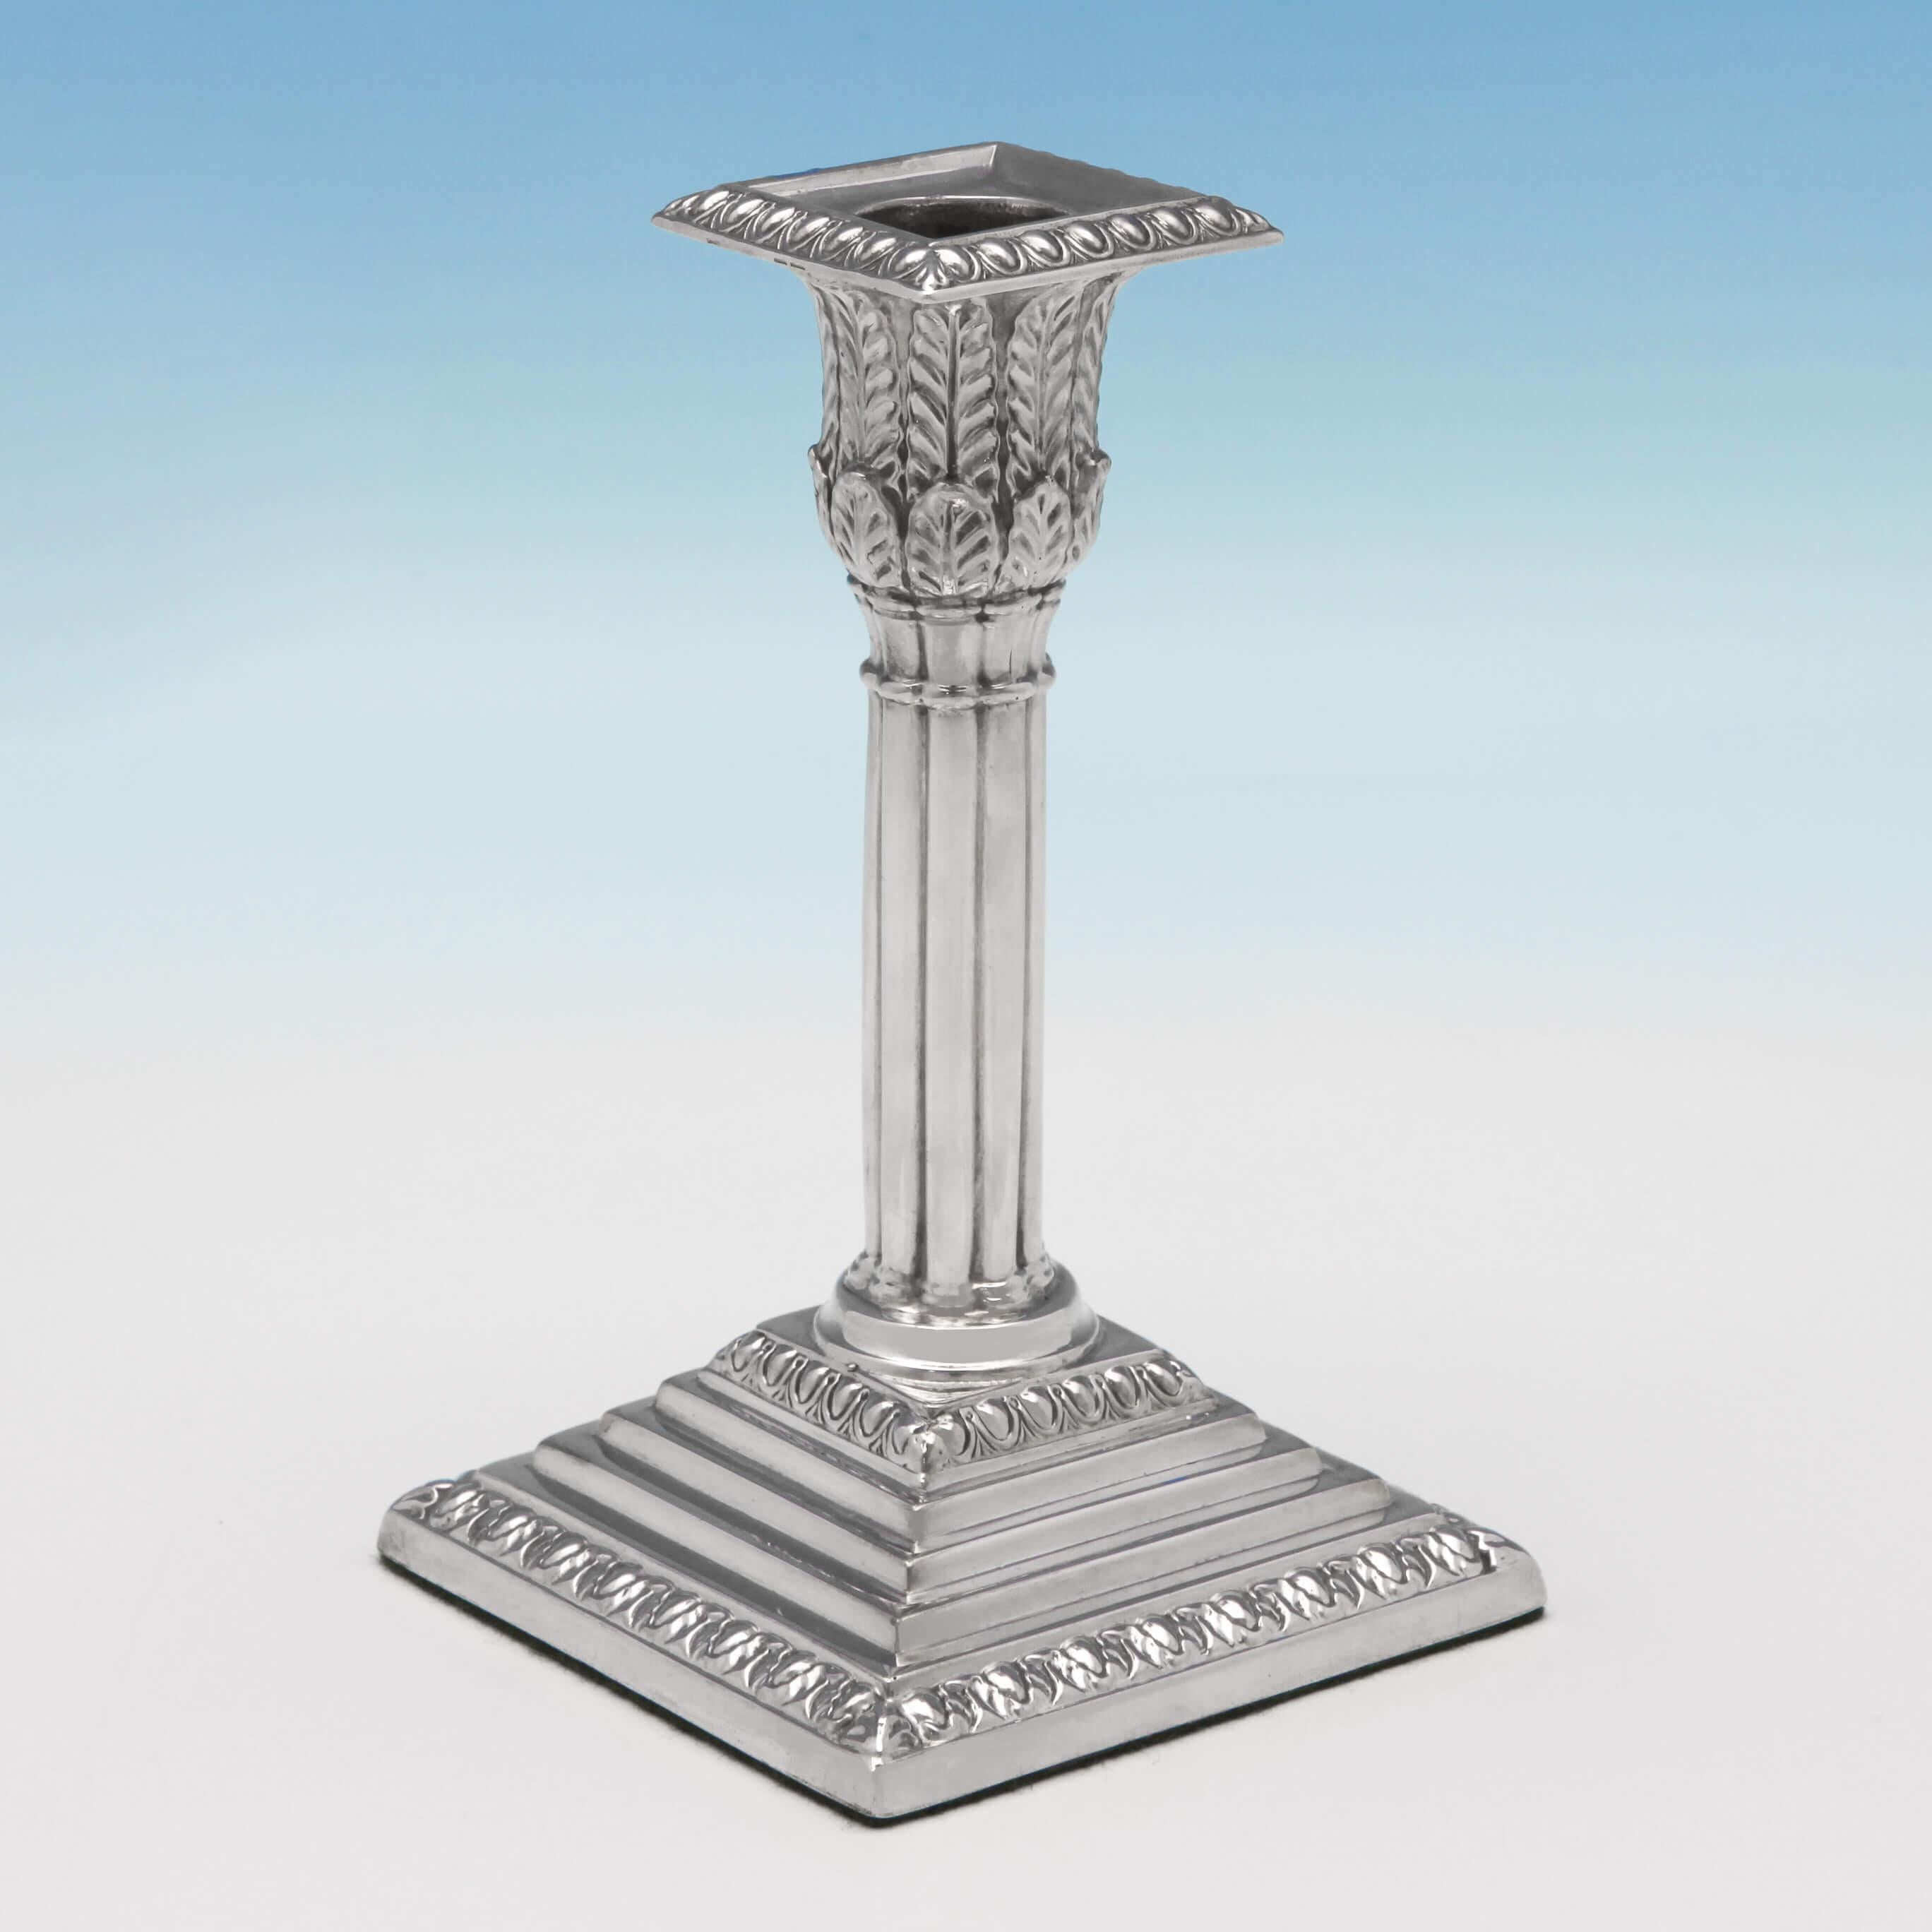 Hallmarked in Sheffield in 1874 by James Kebberling Bembridge, this attractive, Victorian, antique sterling silver pair of candlesticks, stand on square stepped bases, and feature bamboo columns, acanthus leaf decoration to the capitals, and